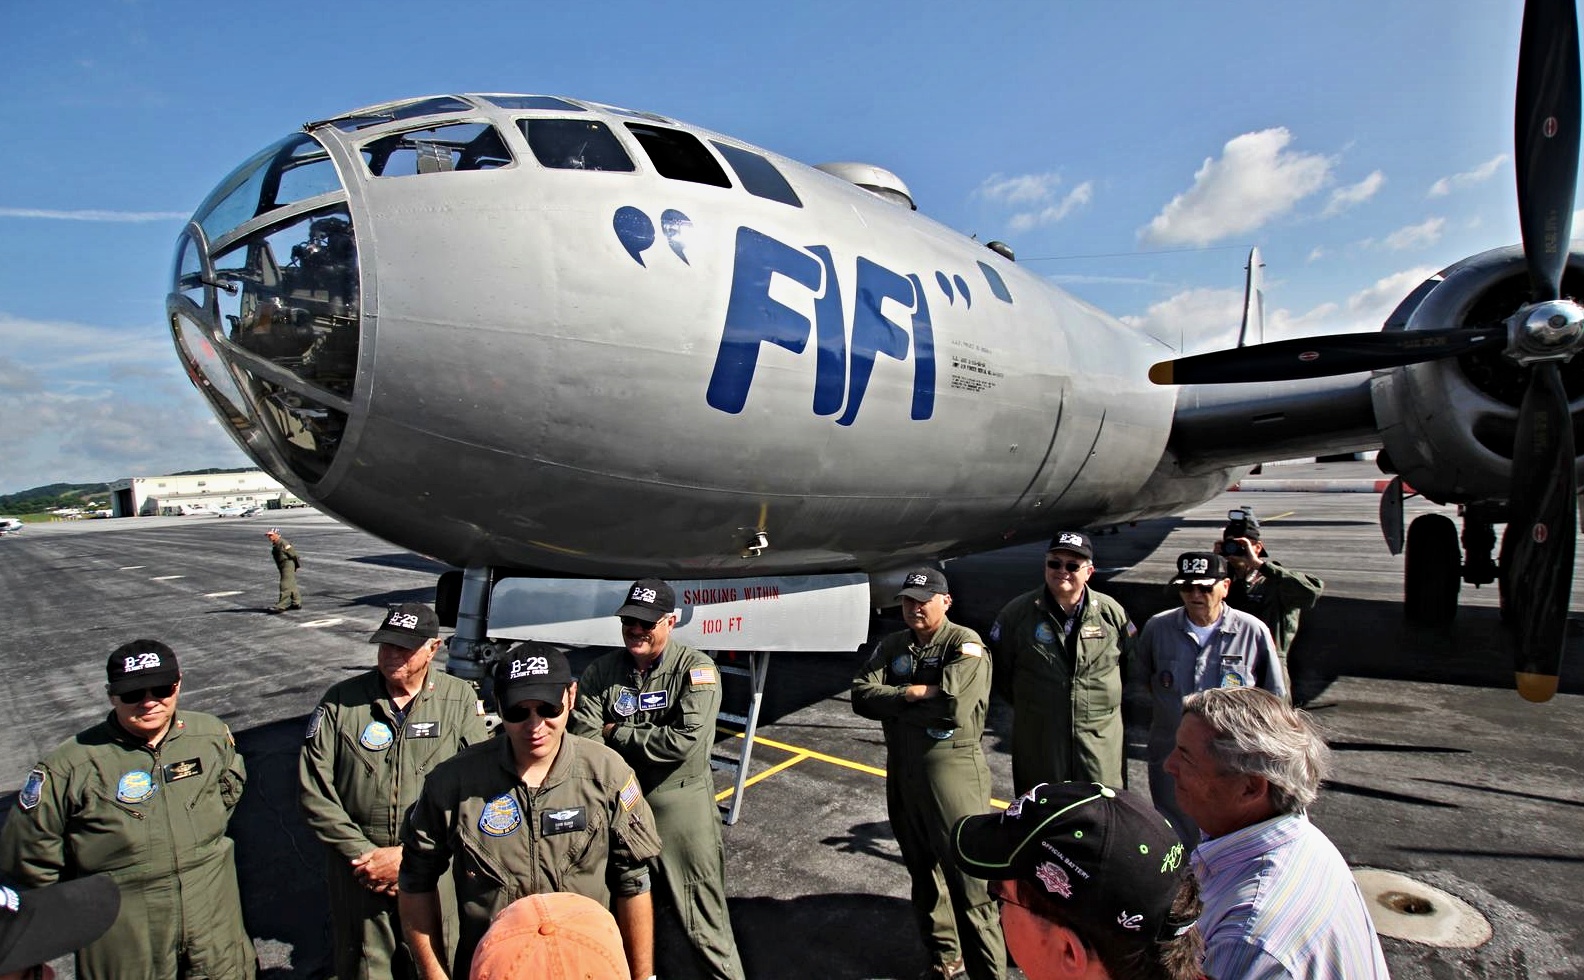 The CAF's B-29A "FIFI" at a 2012 stop in Reading, PA - Photo by David Eckert/Air Museum network